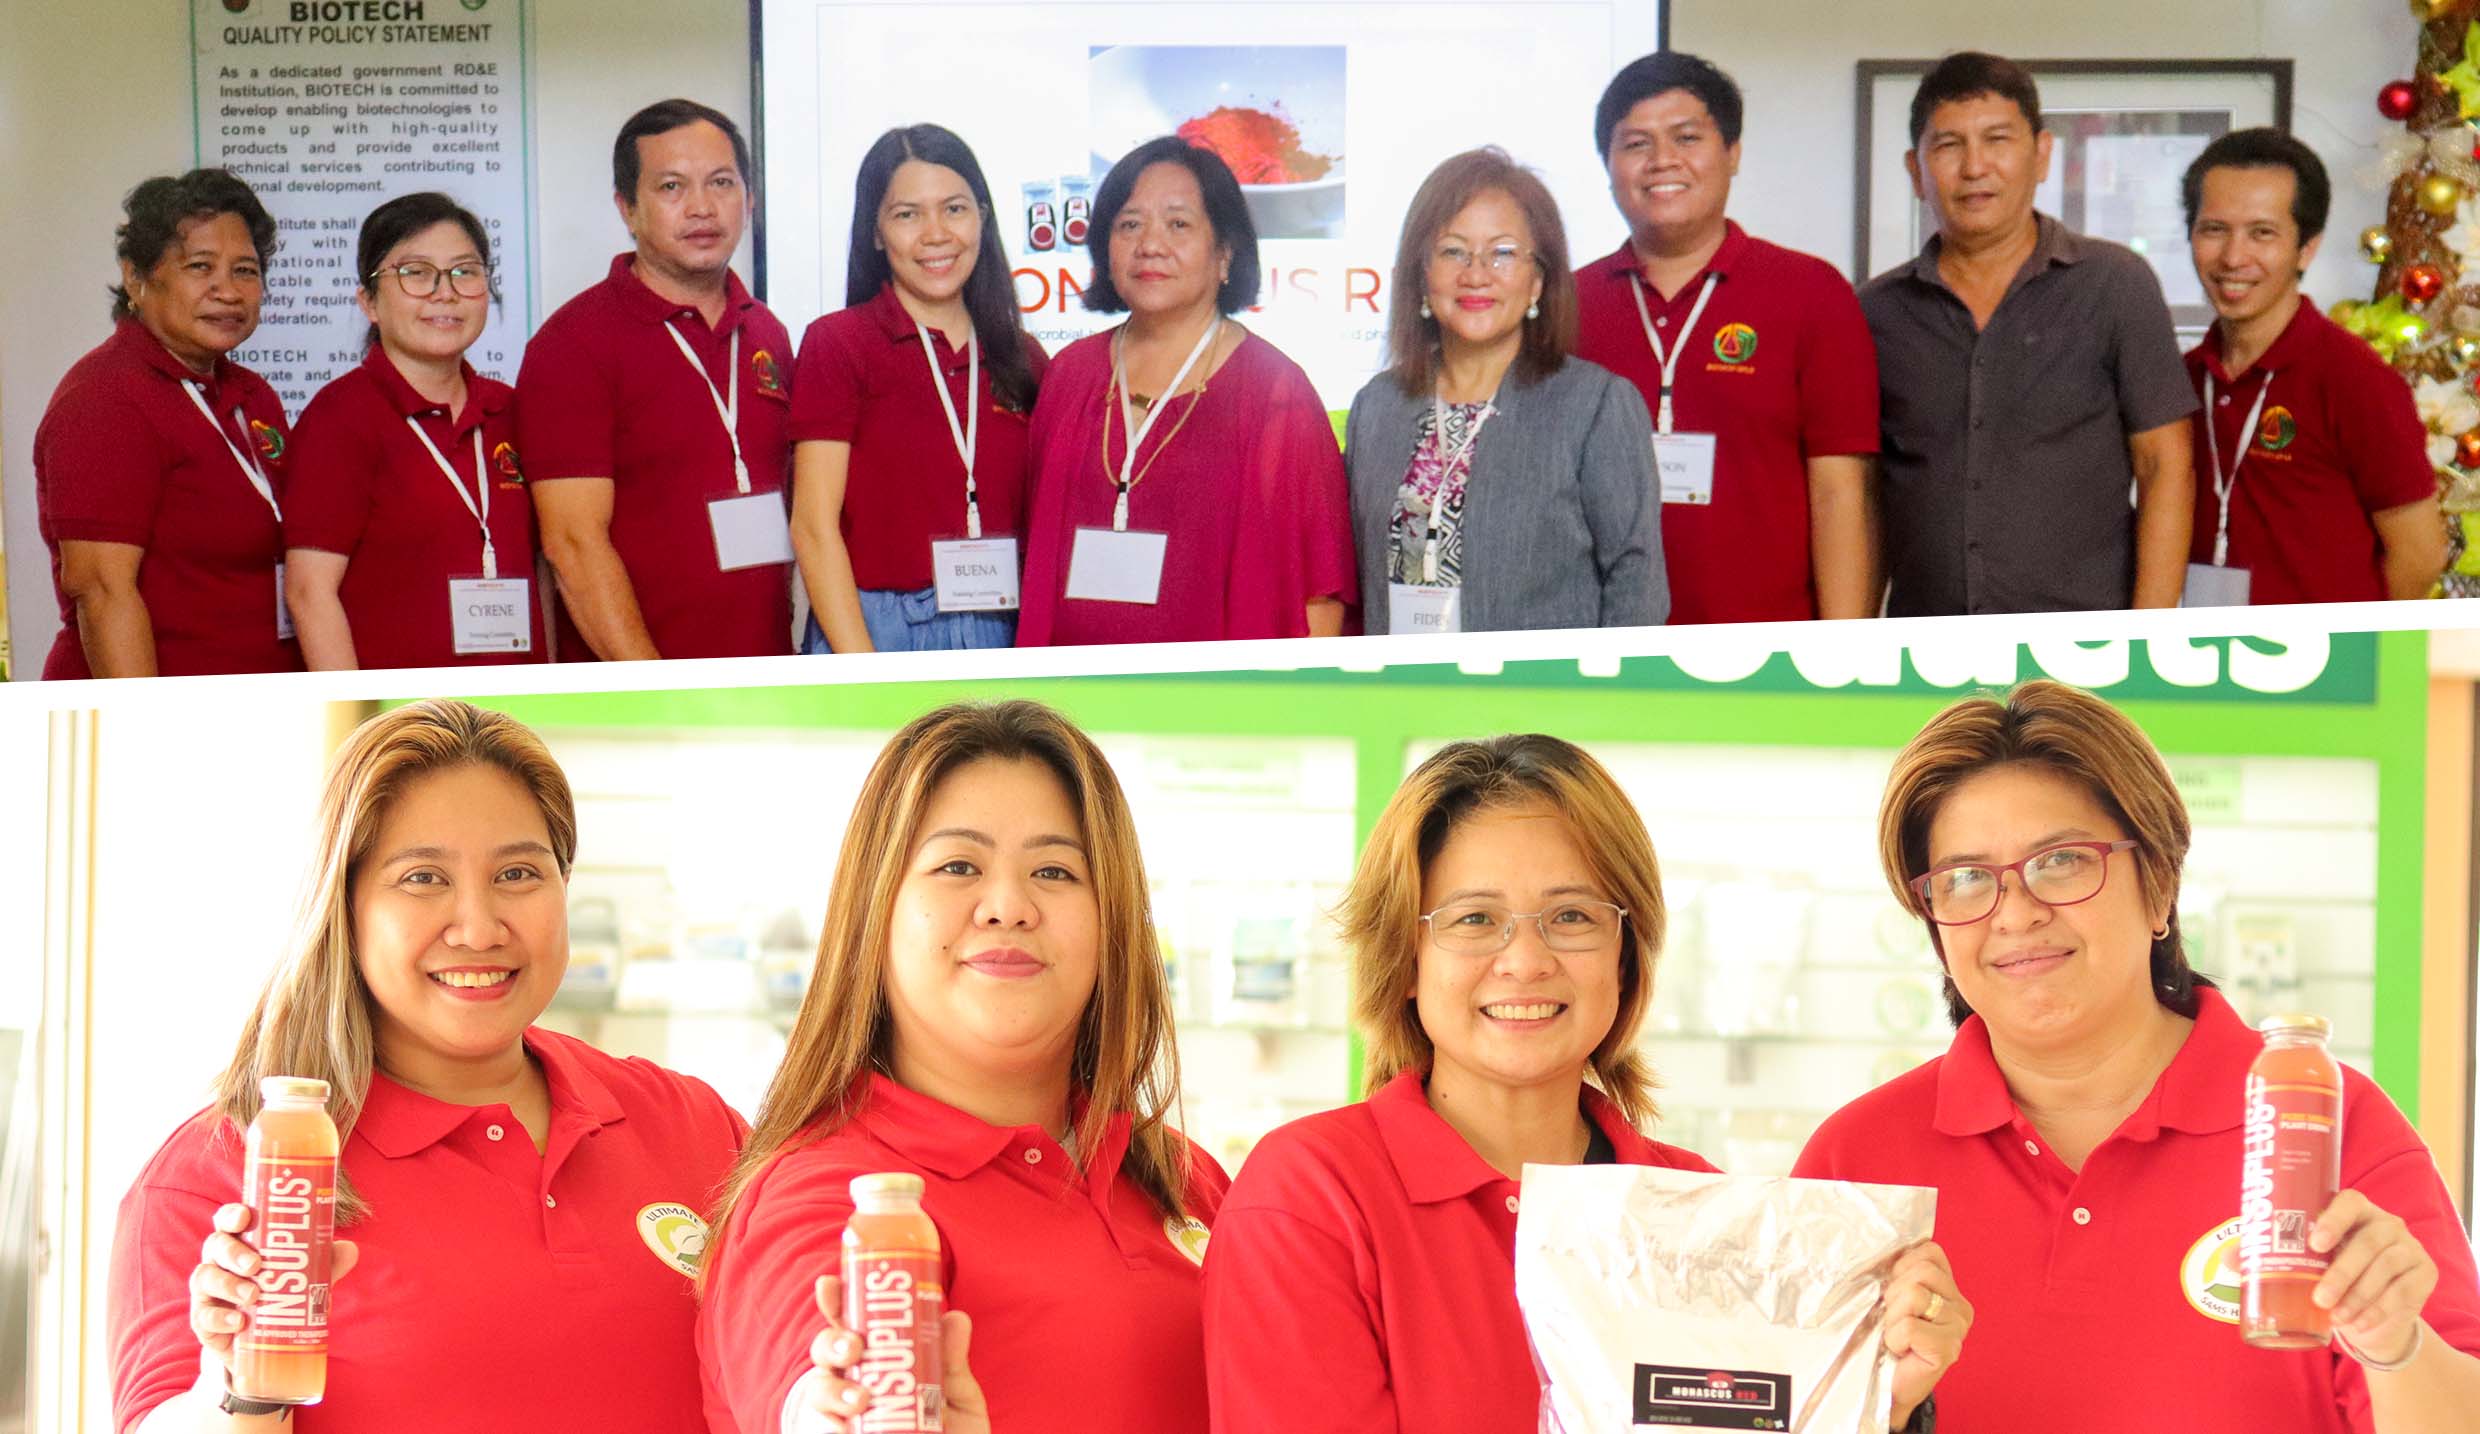 <strong>Insulin plant beverage gets boost from UPLB-BIOTECH’s MONASCUS red</strong>